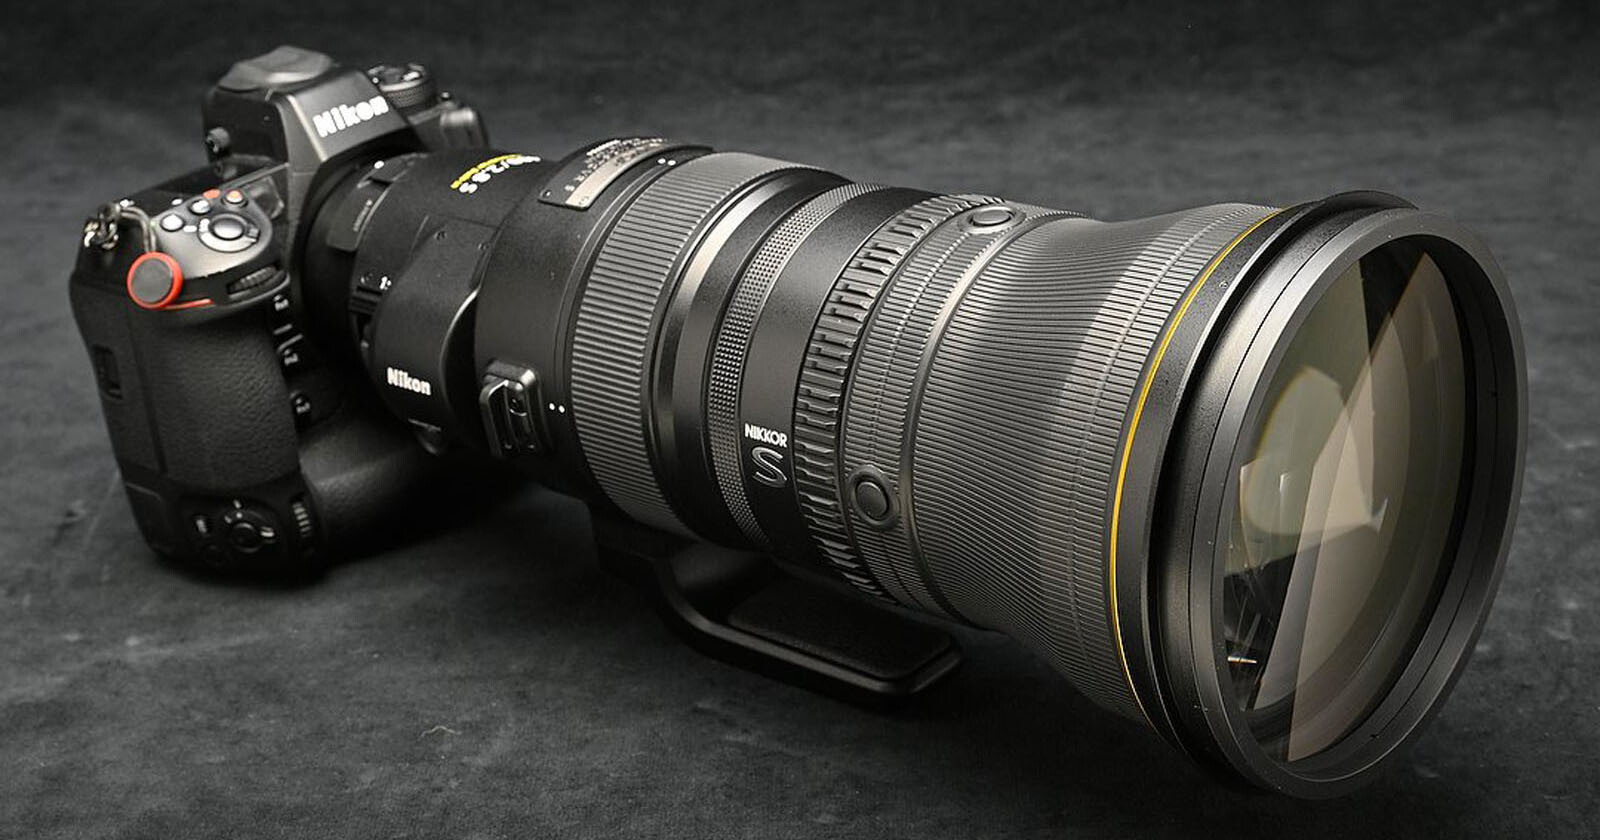 Why Buying a $14,000 Lens Made Sense for Me